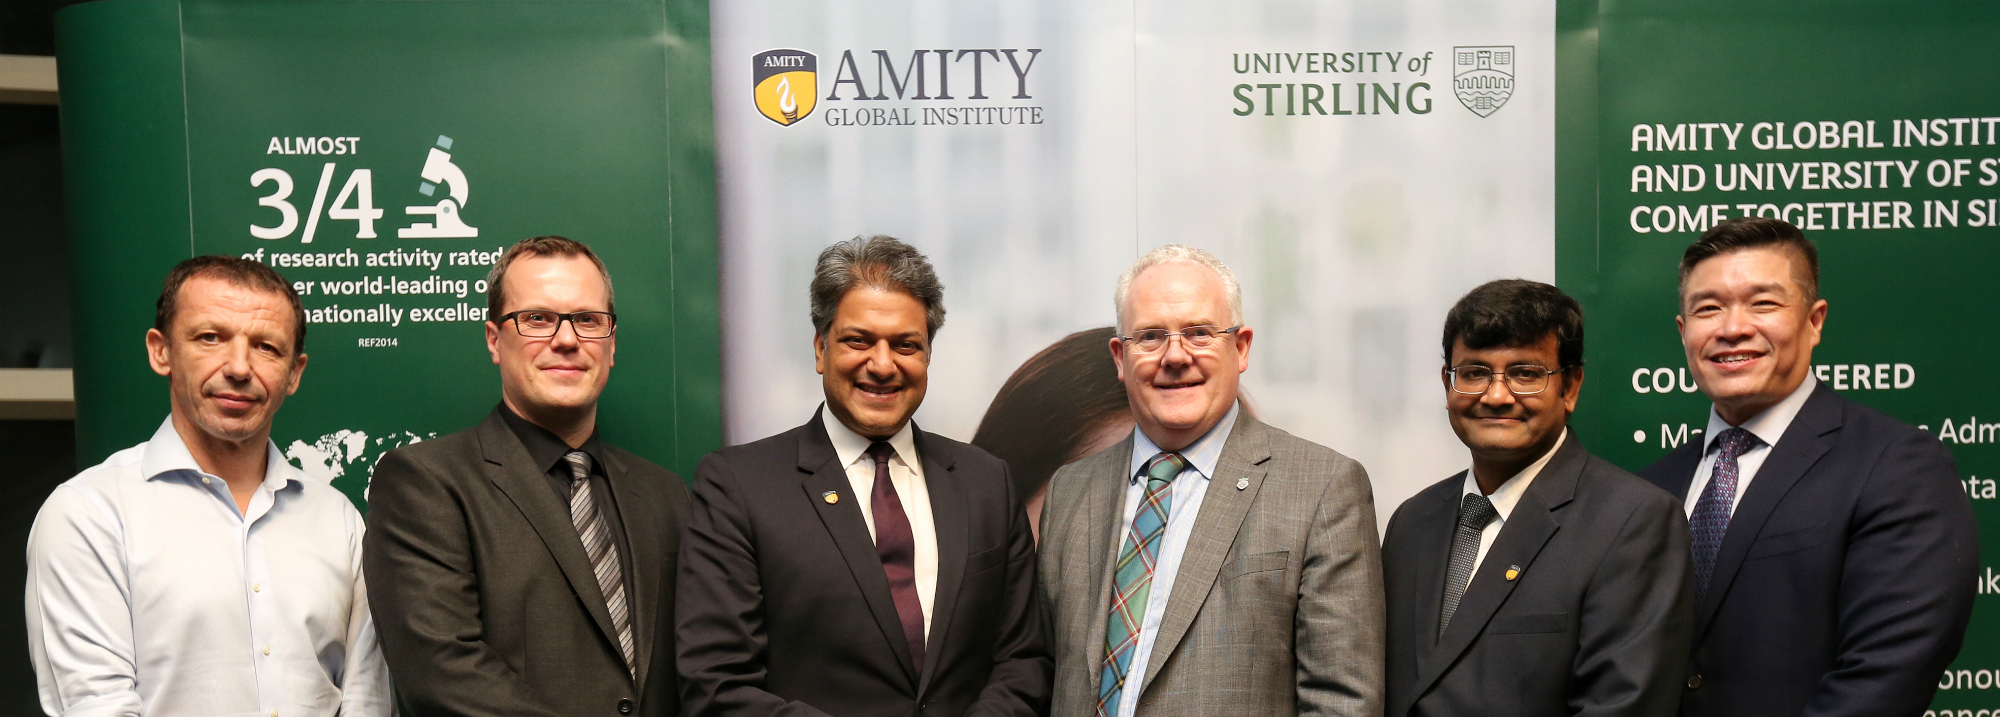 Partnership between University and Amity Global Institute announced